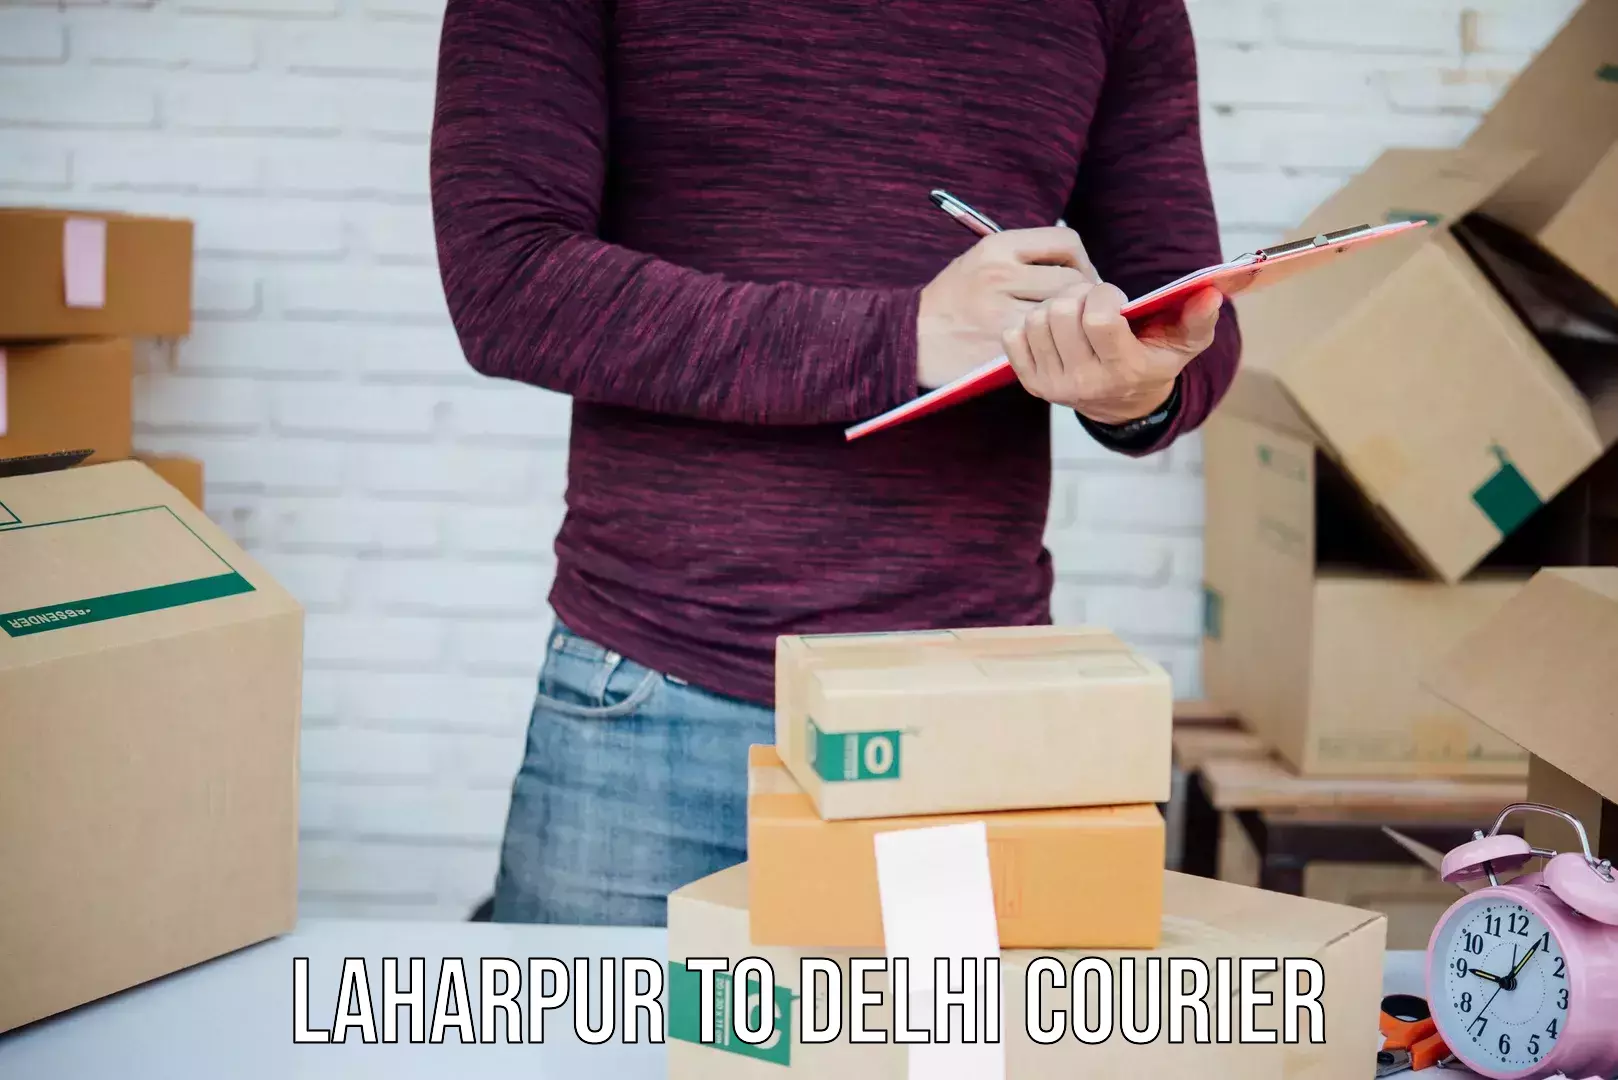 Tailored shipping plans Laharpur to NCR